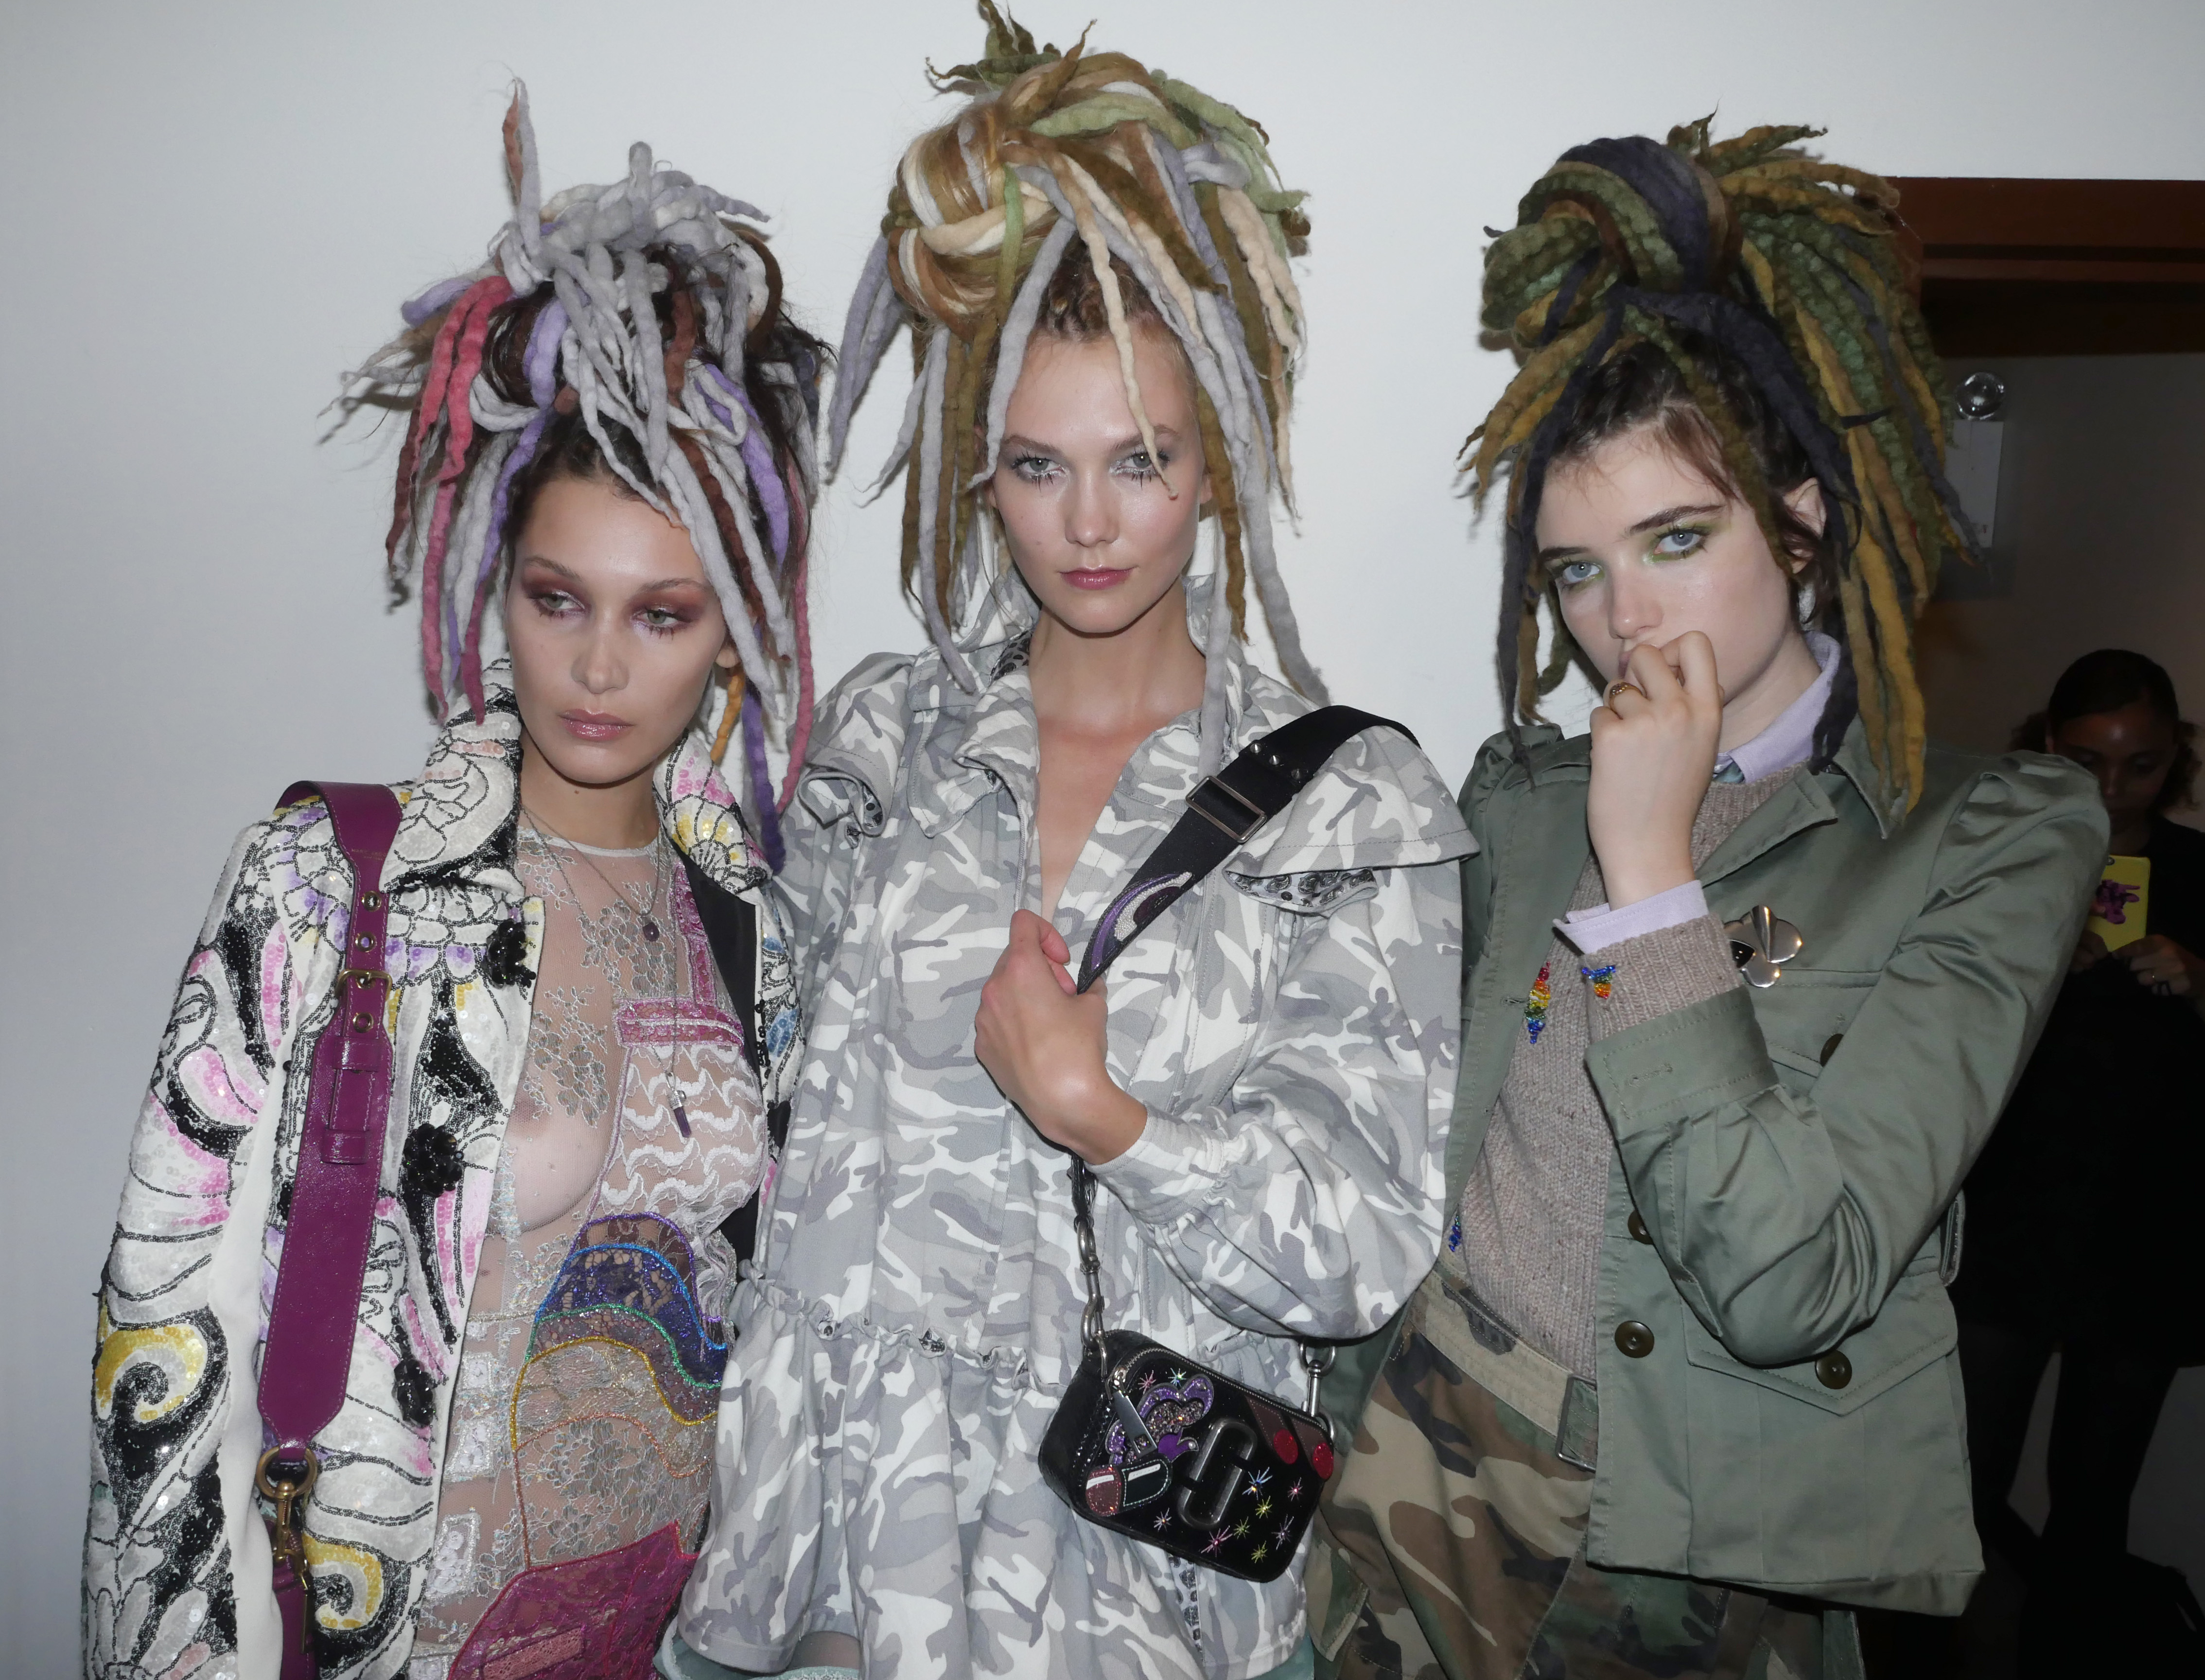 Bella Hadid, Karlie Kloss and Grace Hartzel backstage at the Marc Jacobs spring 2017 runway show in dreadlock wigs, which Jacobs apologized for after the show.